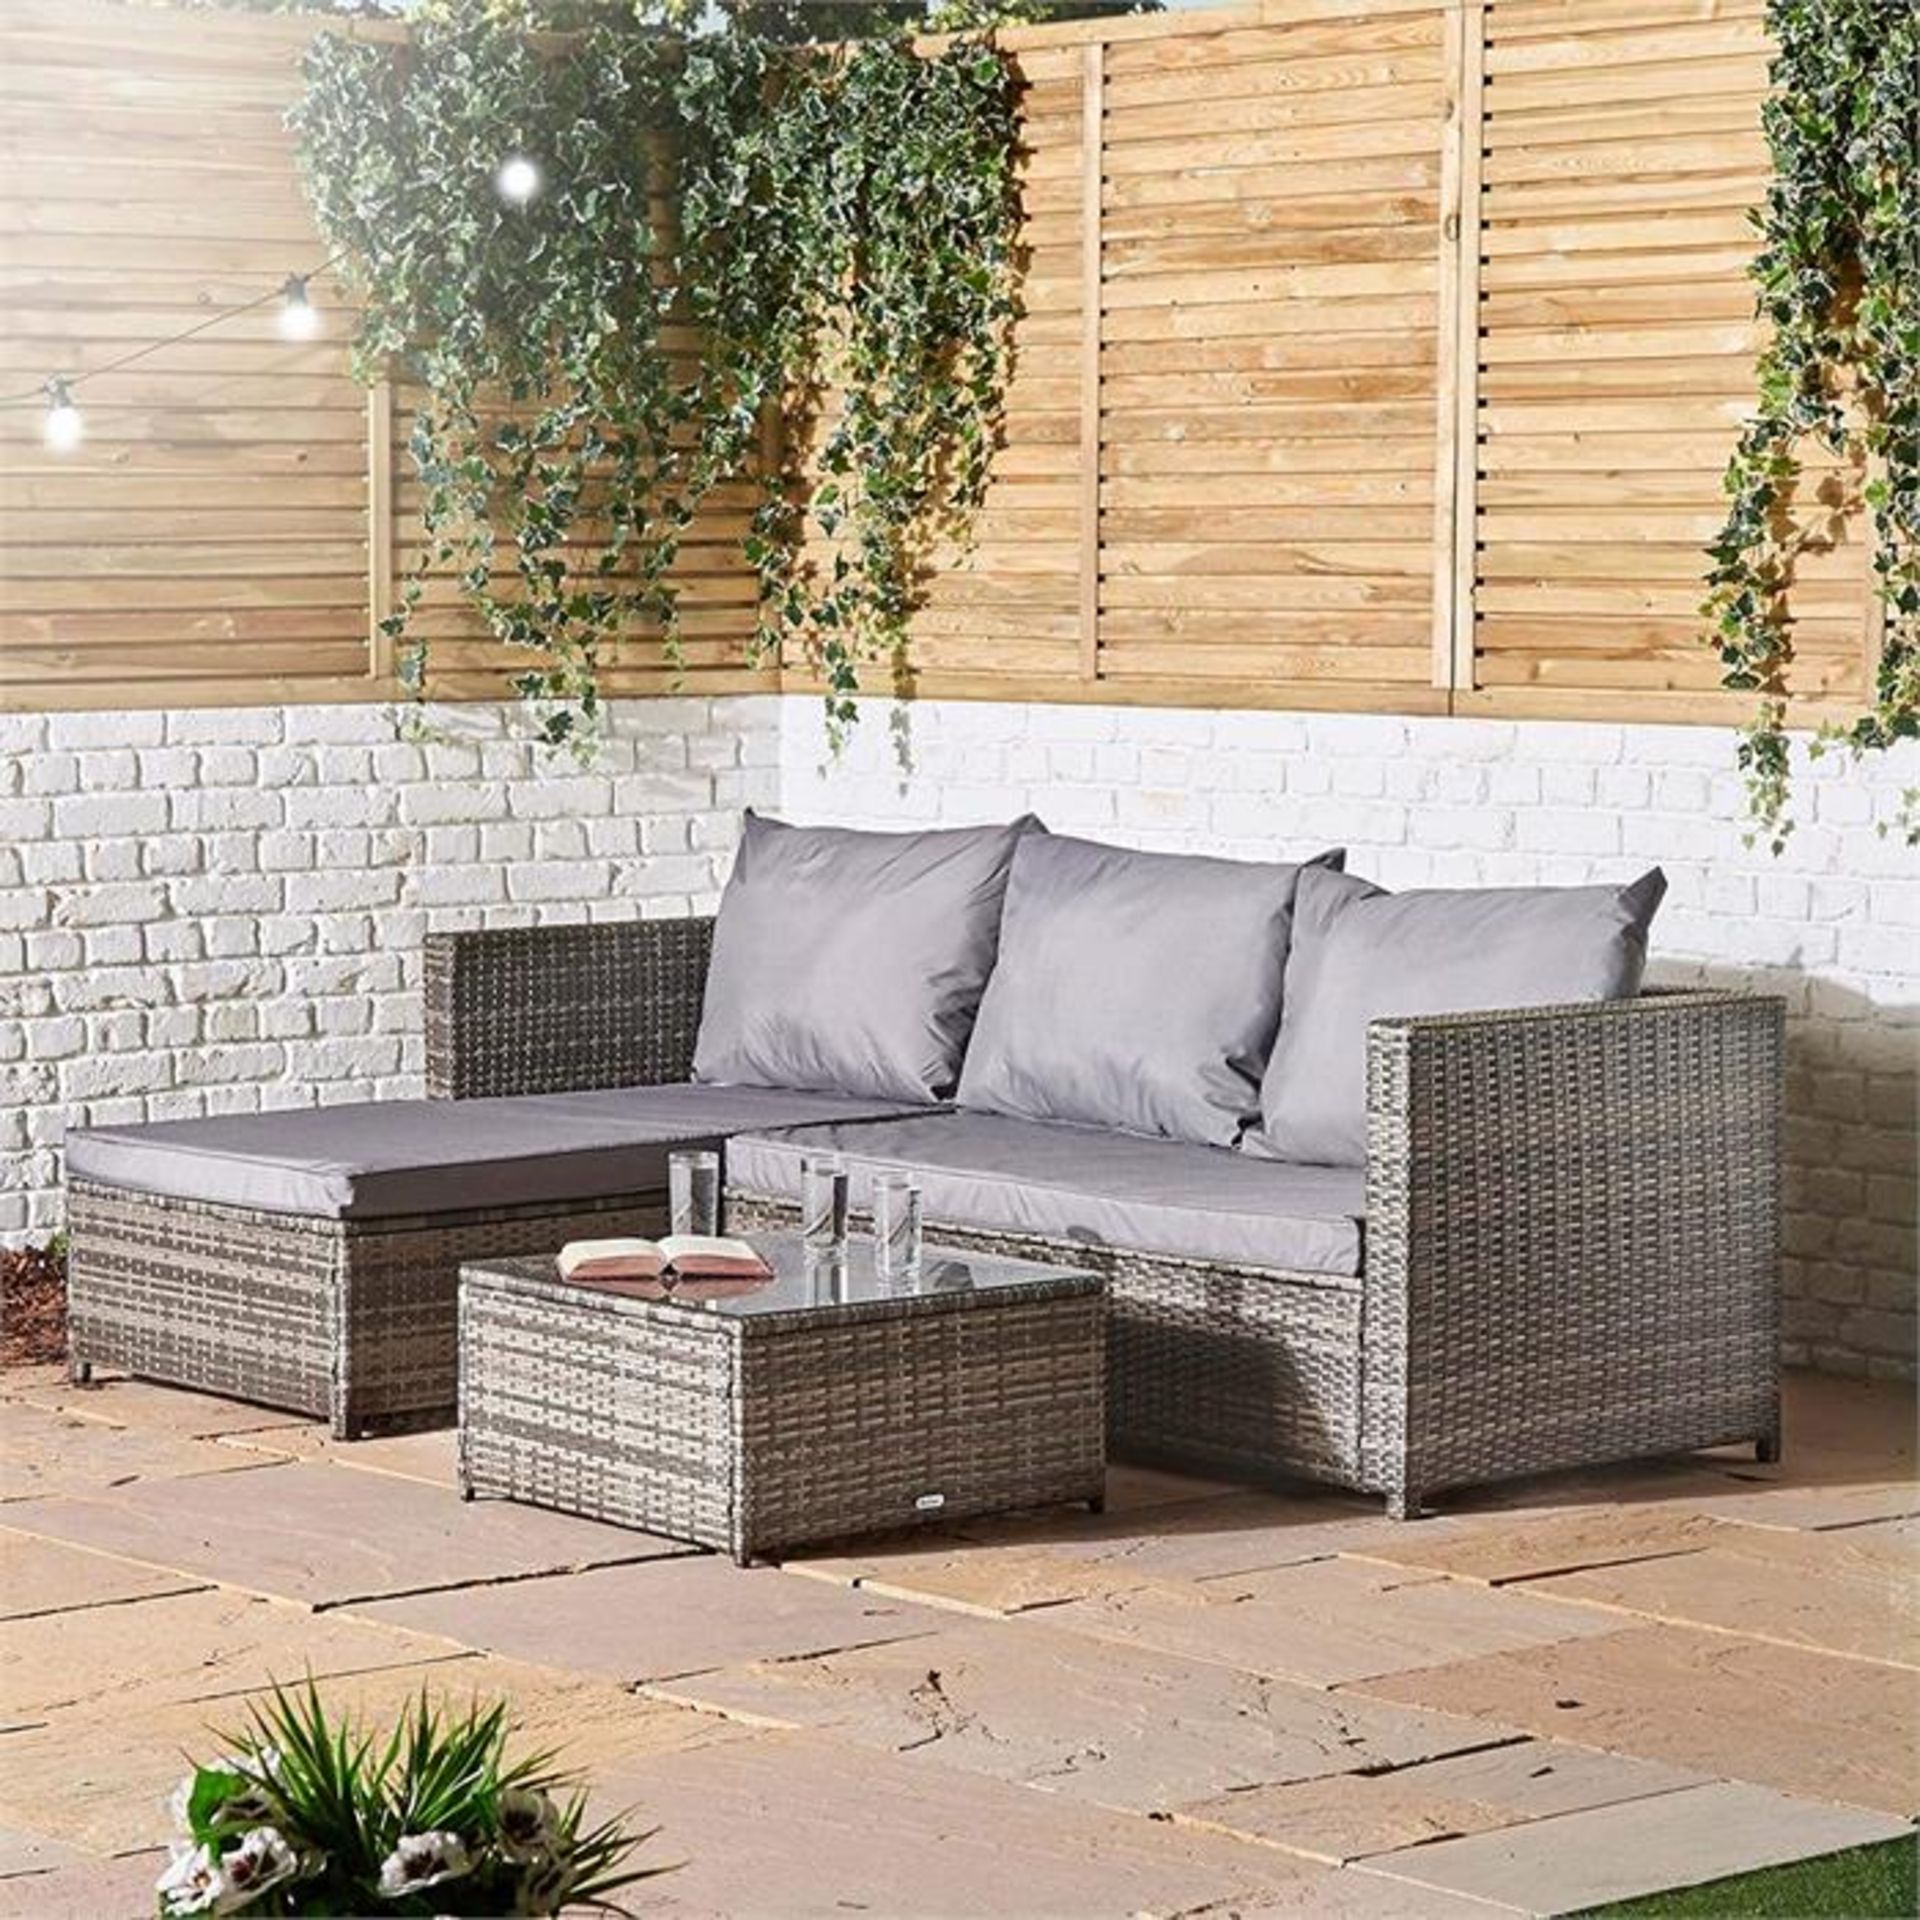 Rattan Corner Sofa Set. Unchecked (In 2 boxes). RRP Circa £289.99 Please note by Bidding on this